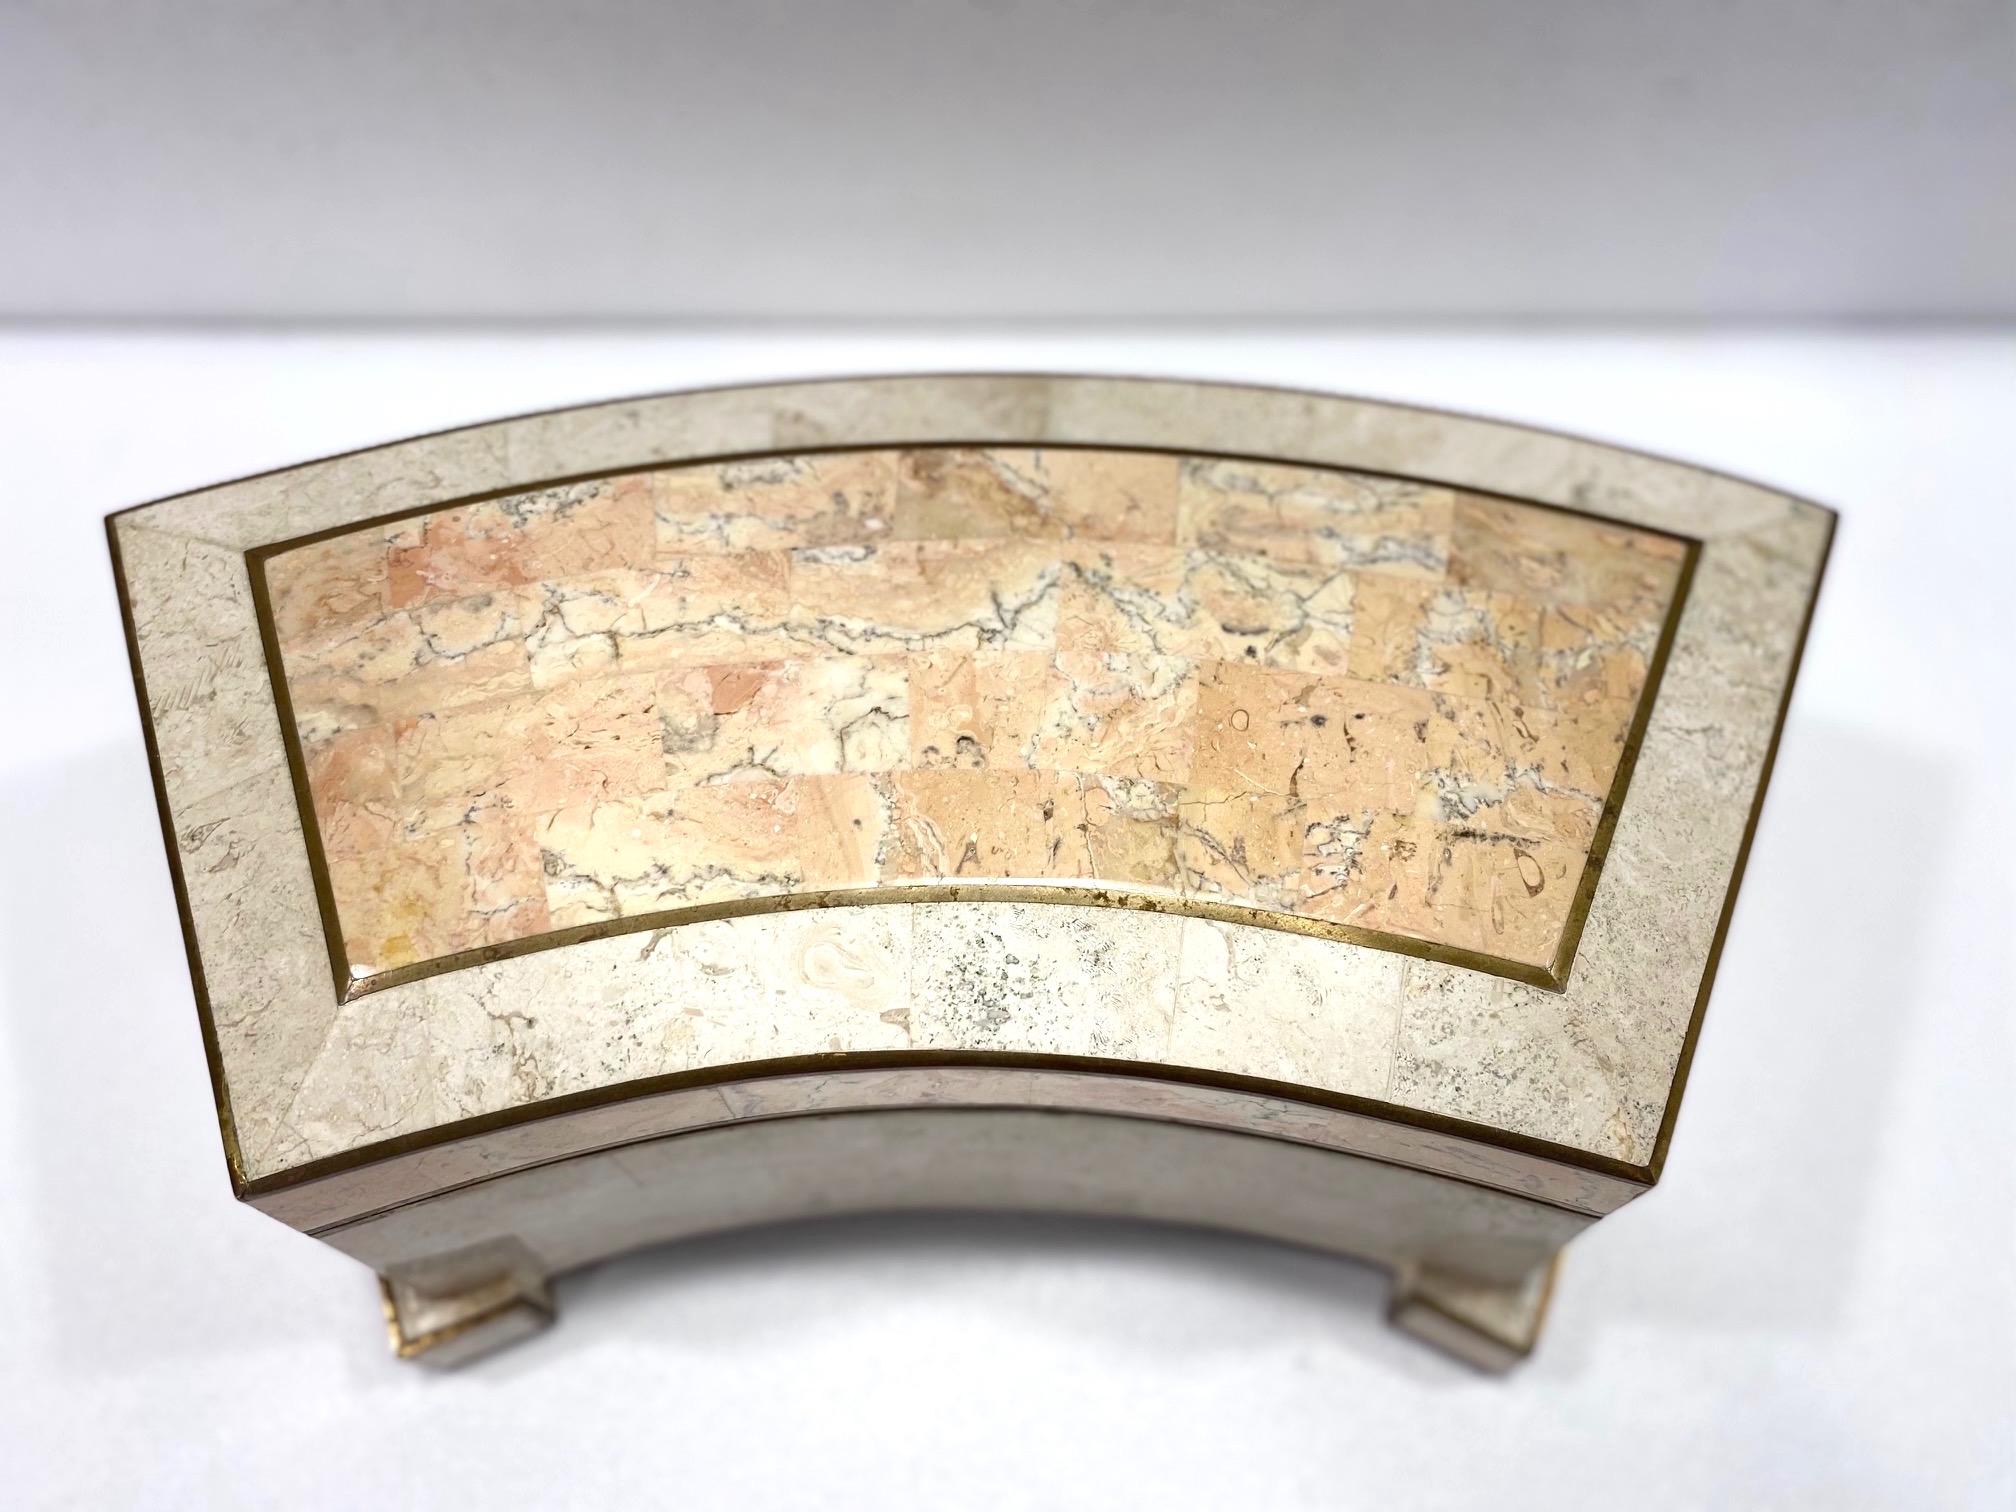 Mid-Century Modern large tessellated marble and stone jewelry box. The footed box features a plinth architectural curved frame with brass metal inlays and trim accent along all edges. Removable lid opens to a luxe felt interior in chocolate brown.